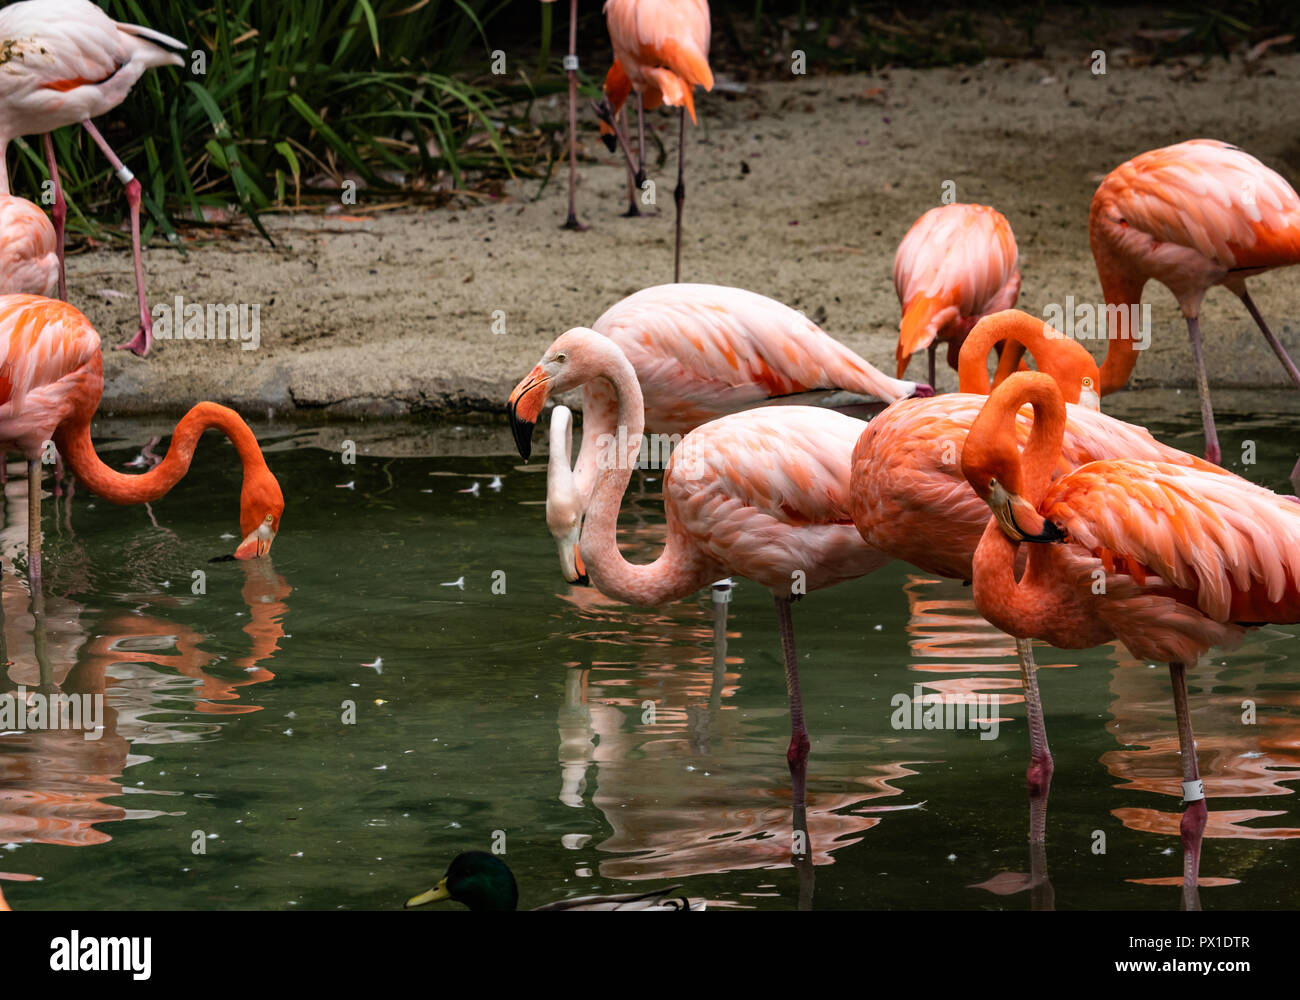 Group flock of a variety of colorful flamingos standing in a pond, some are grooming themselves Stock Photo